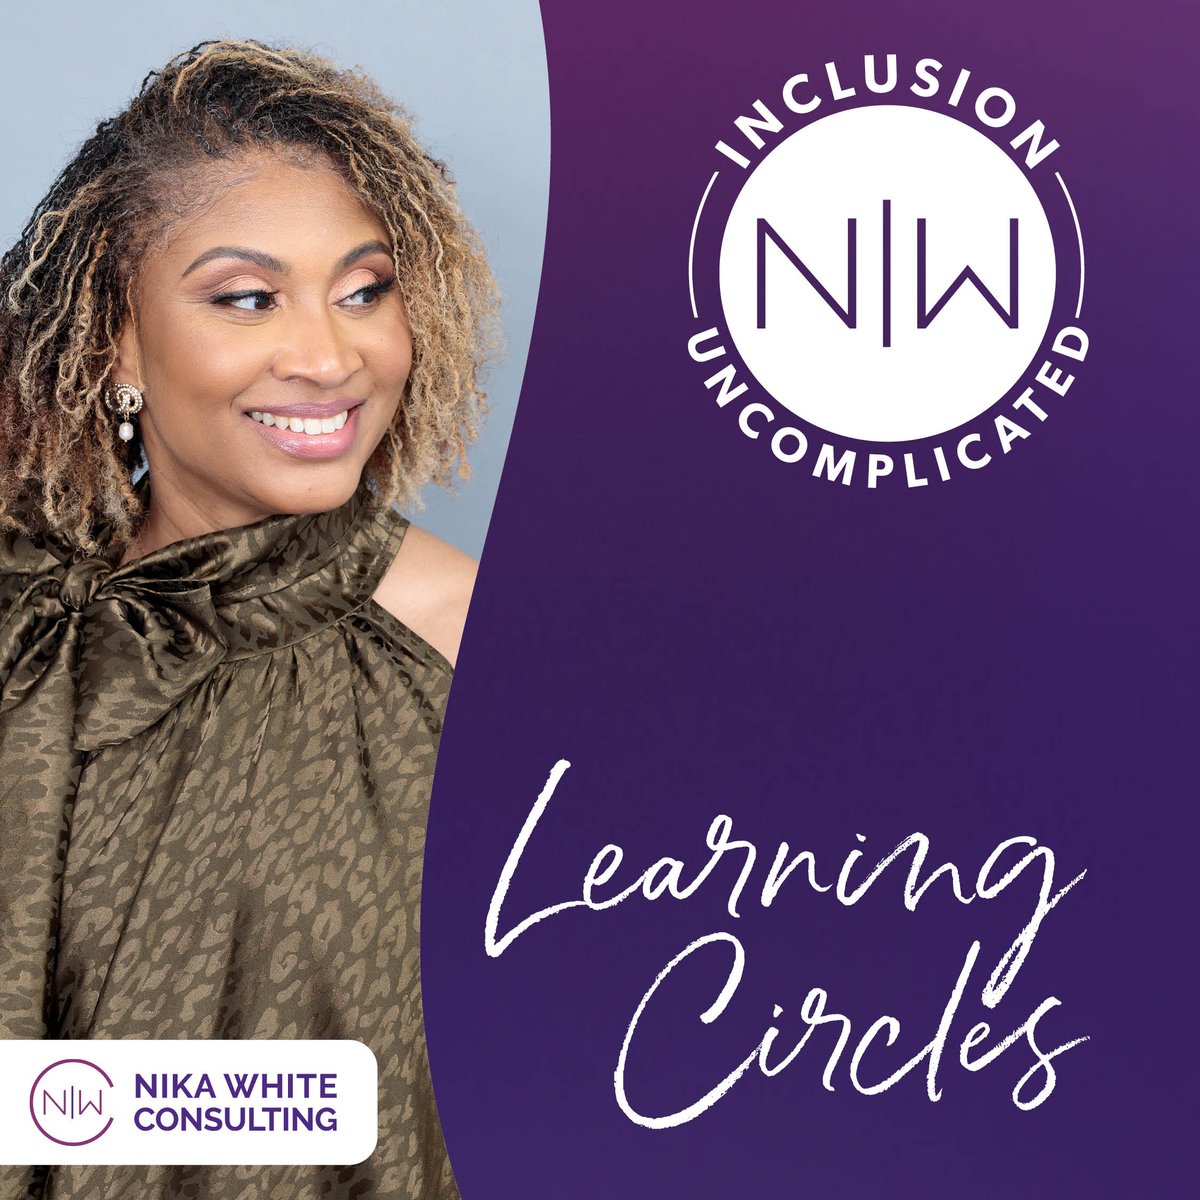 'Learning circles are a great addition to organizations that want to take their employees on a deeper dive to understand their own societal positions.'

To learn more about #learningcircles, join me on #youtube for #InclusionUncomplicated: youtu.be/g8k8jnjgR9g